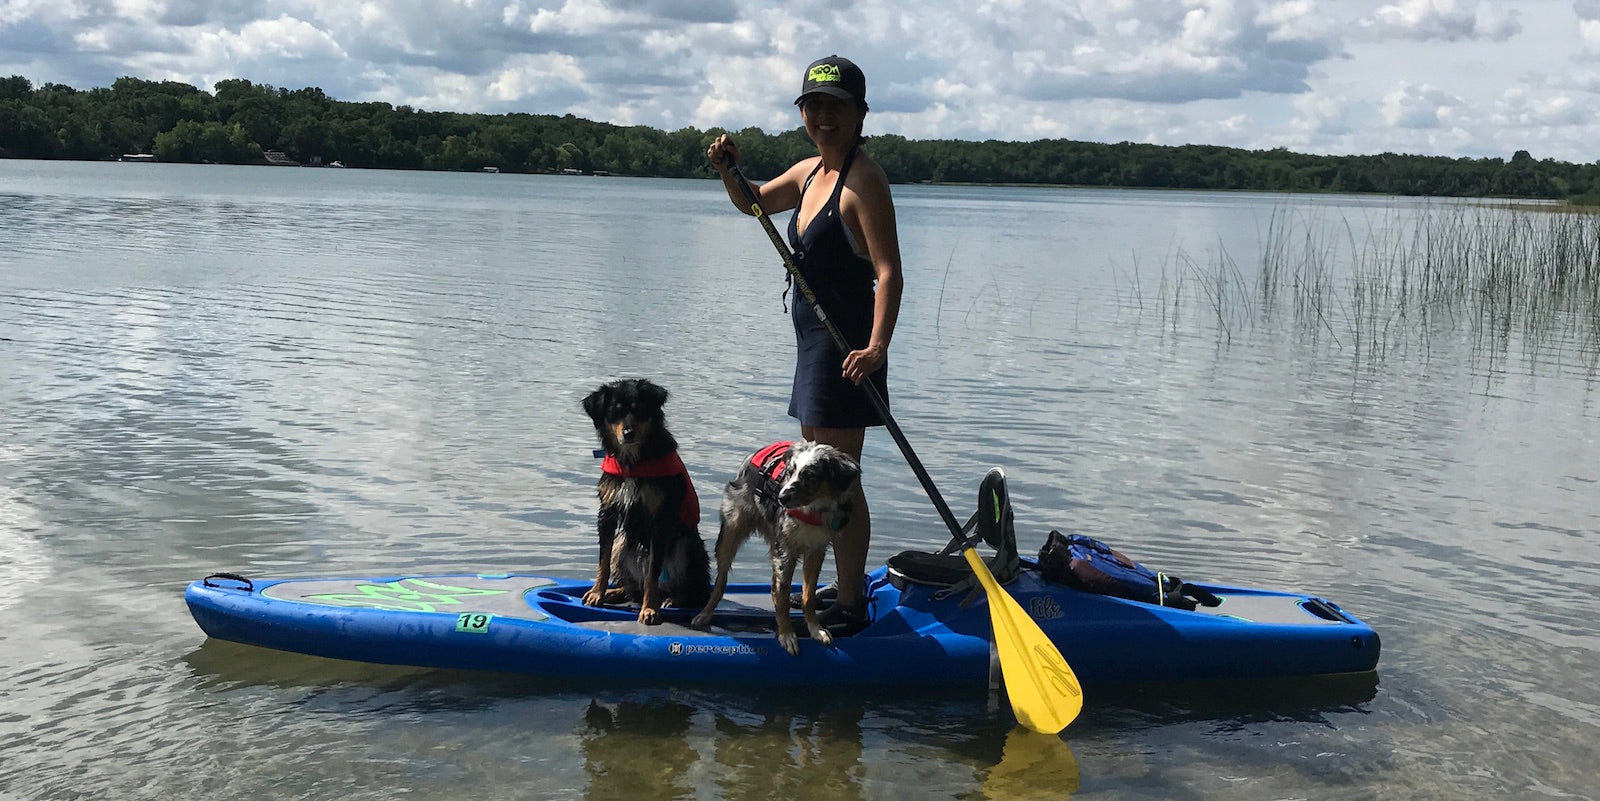 Download Bf4 Dog And Girl - SUP Pup! Tips for paddle boarding with your dog - DIRO Outdoors